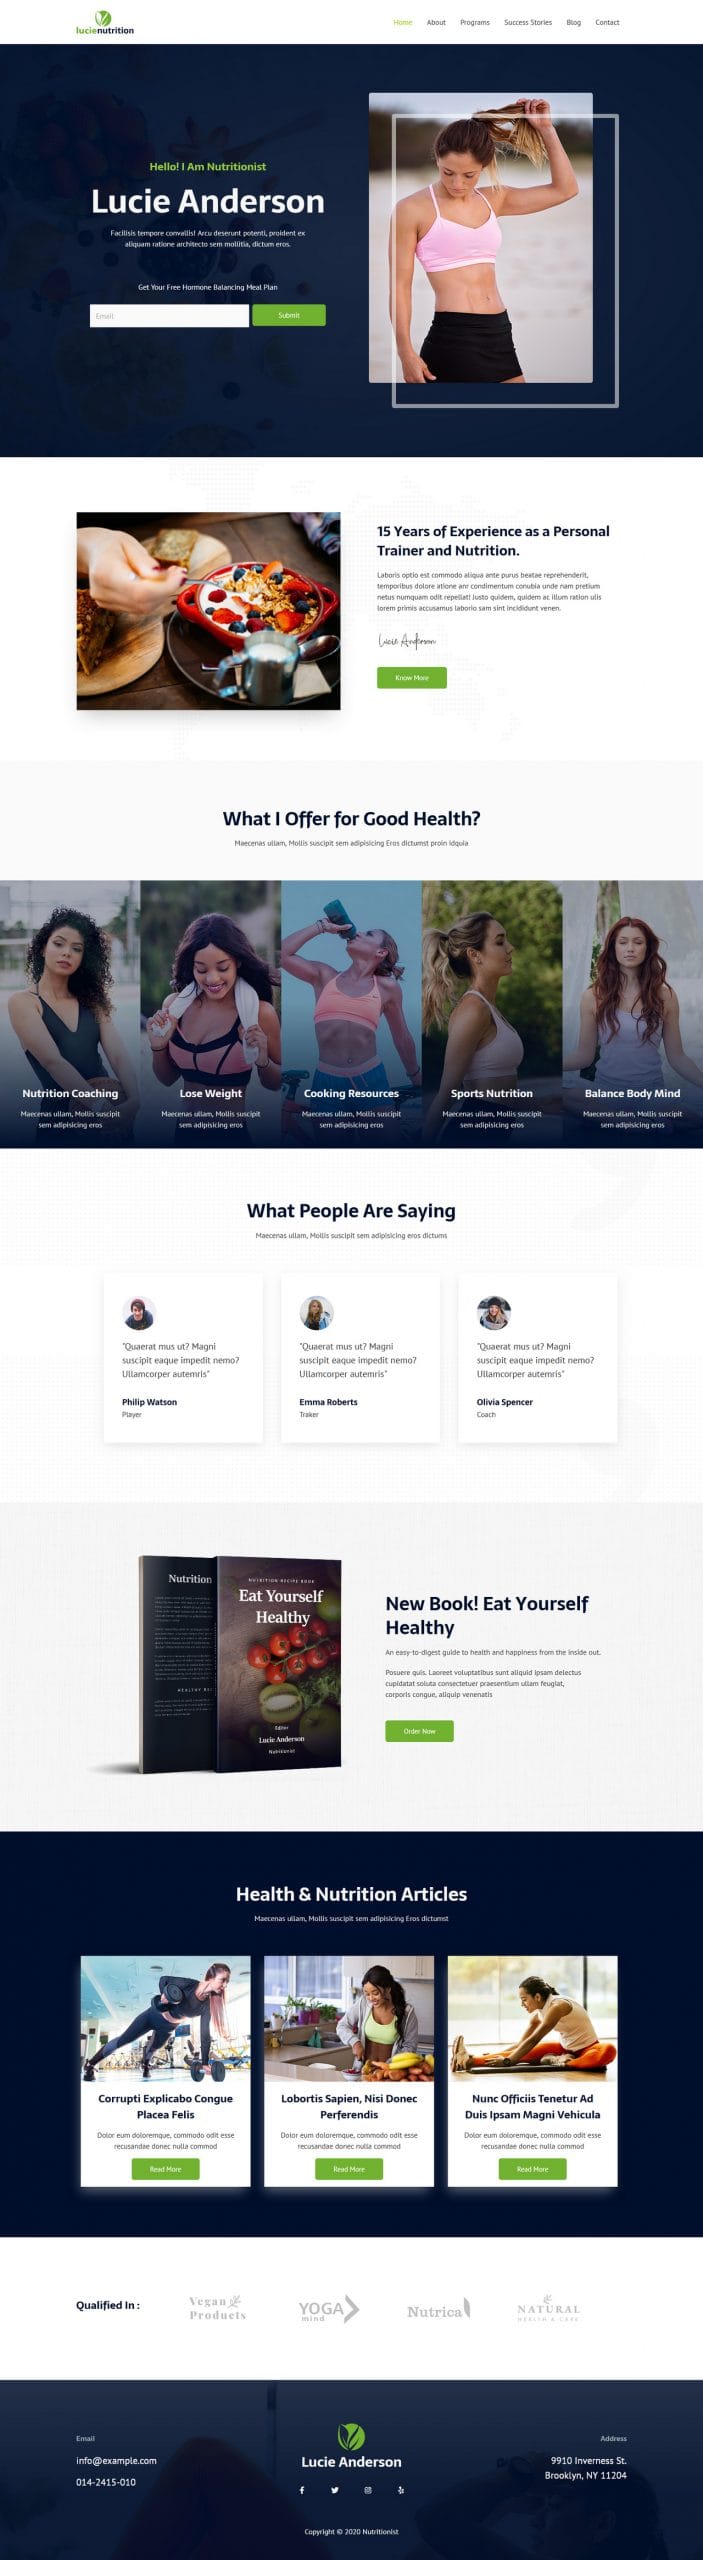 Fagowi.com Website Design Templates For Nutritionist Female Weight Loss - Home Page Image